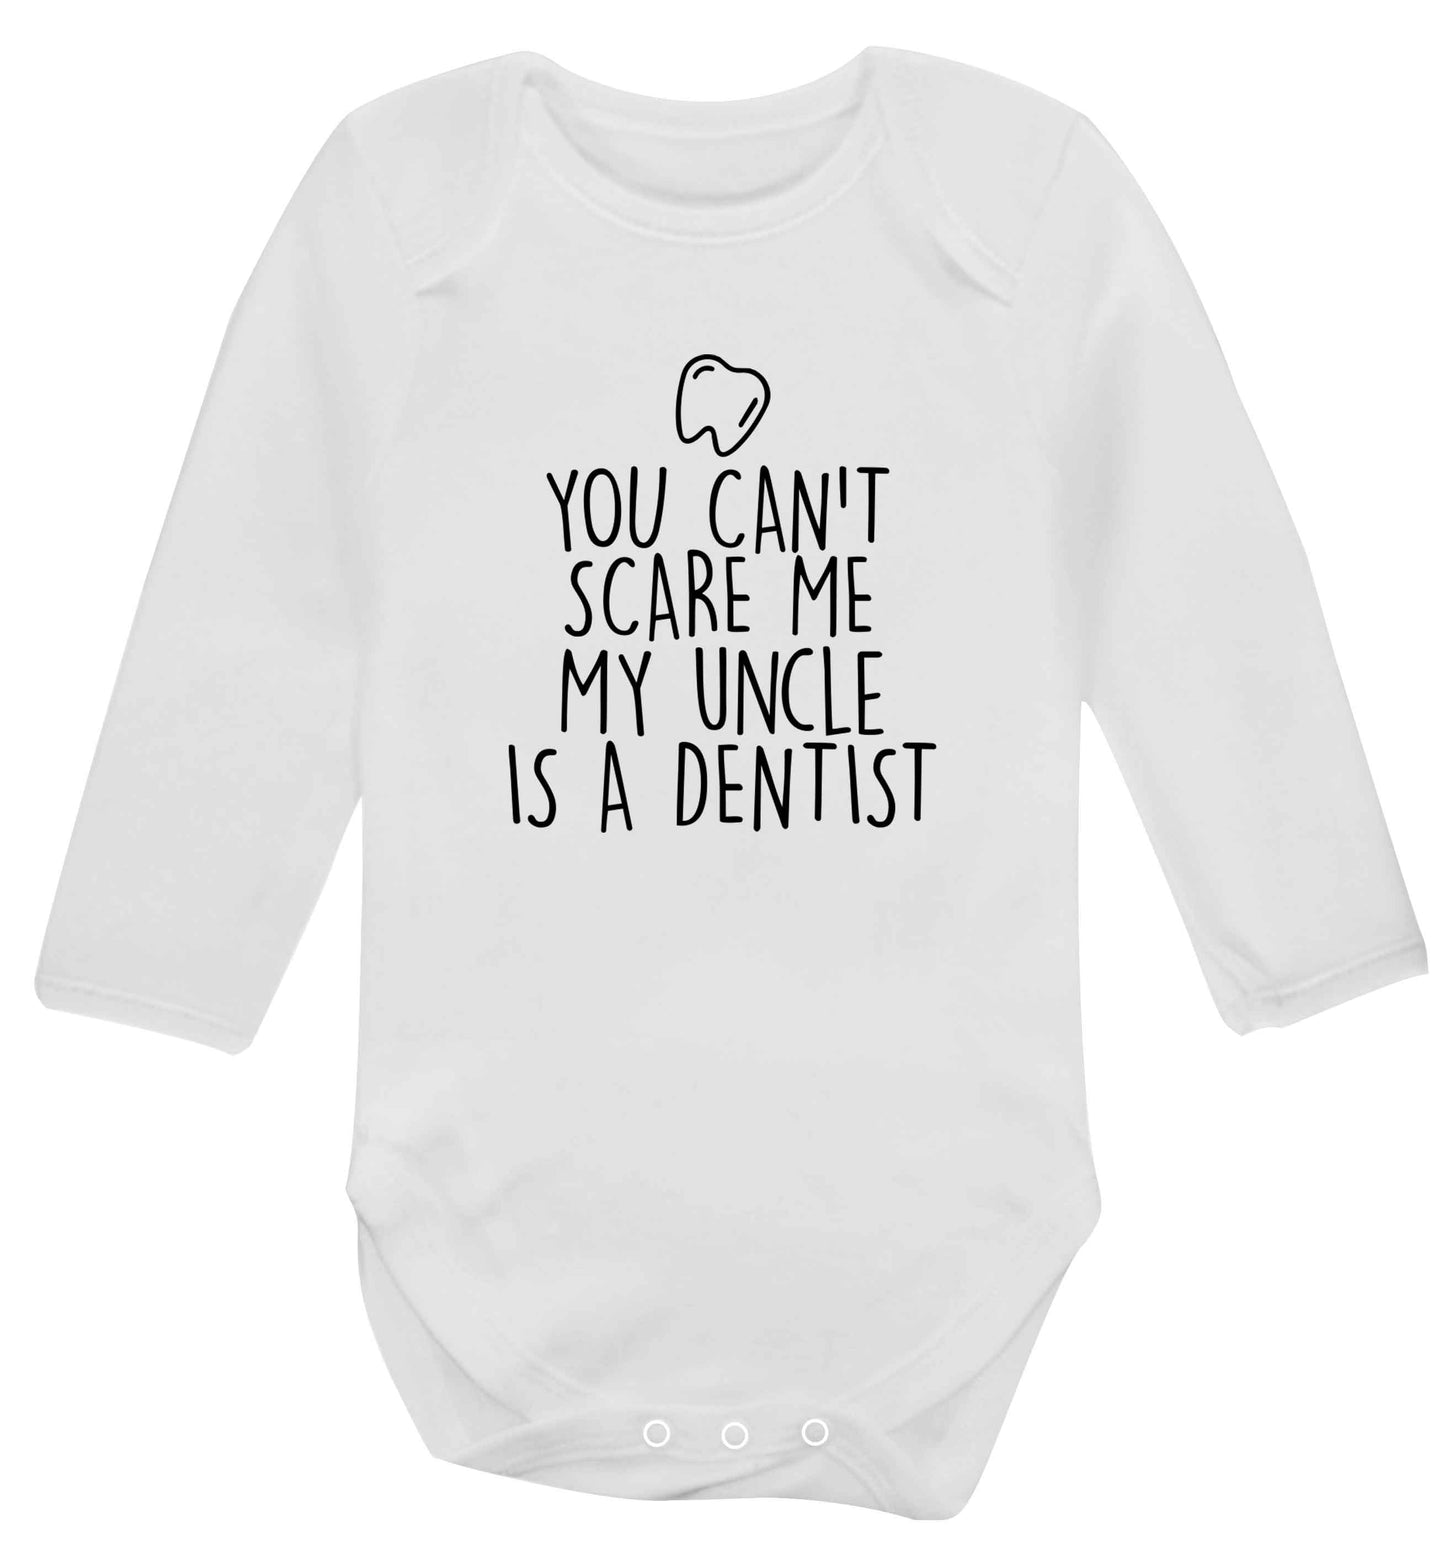 You can't scare me my uncle is a dentist baby vest long sleeved white 6-12 months